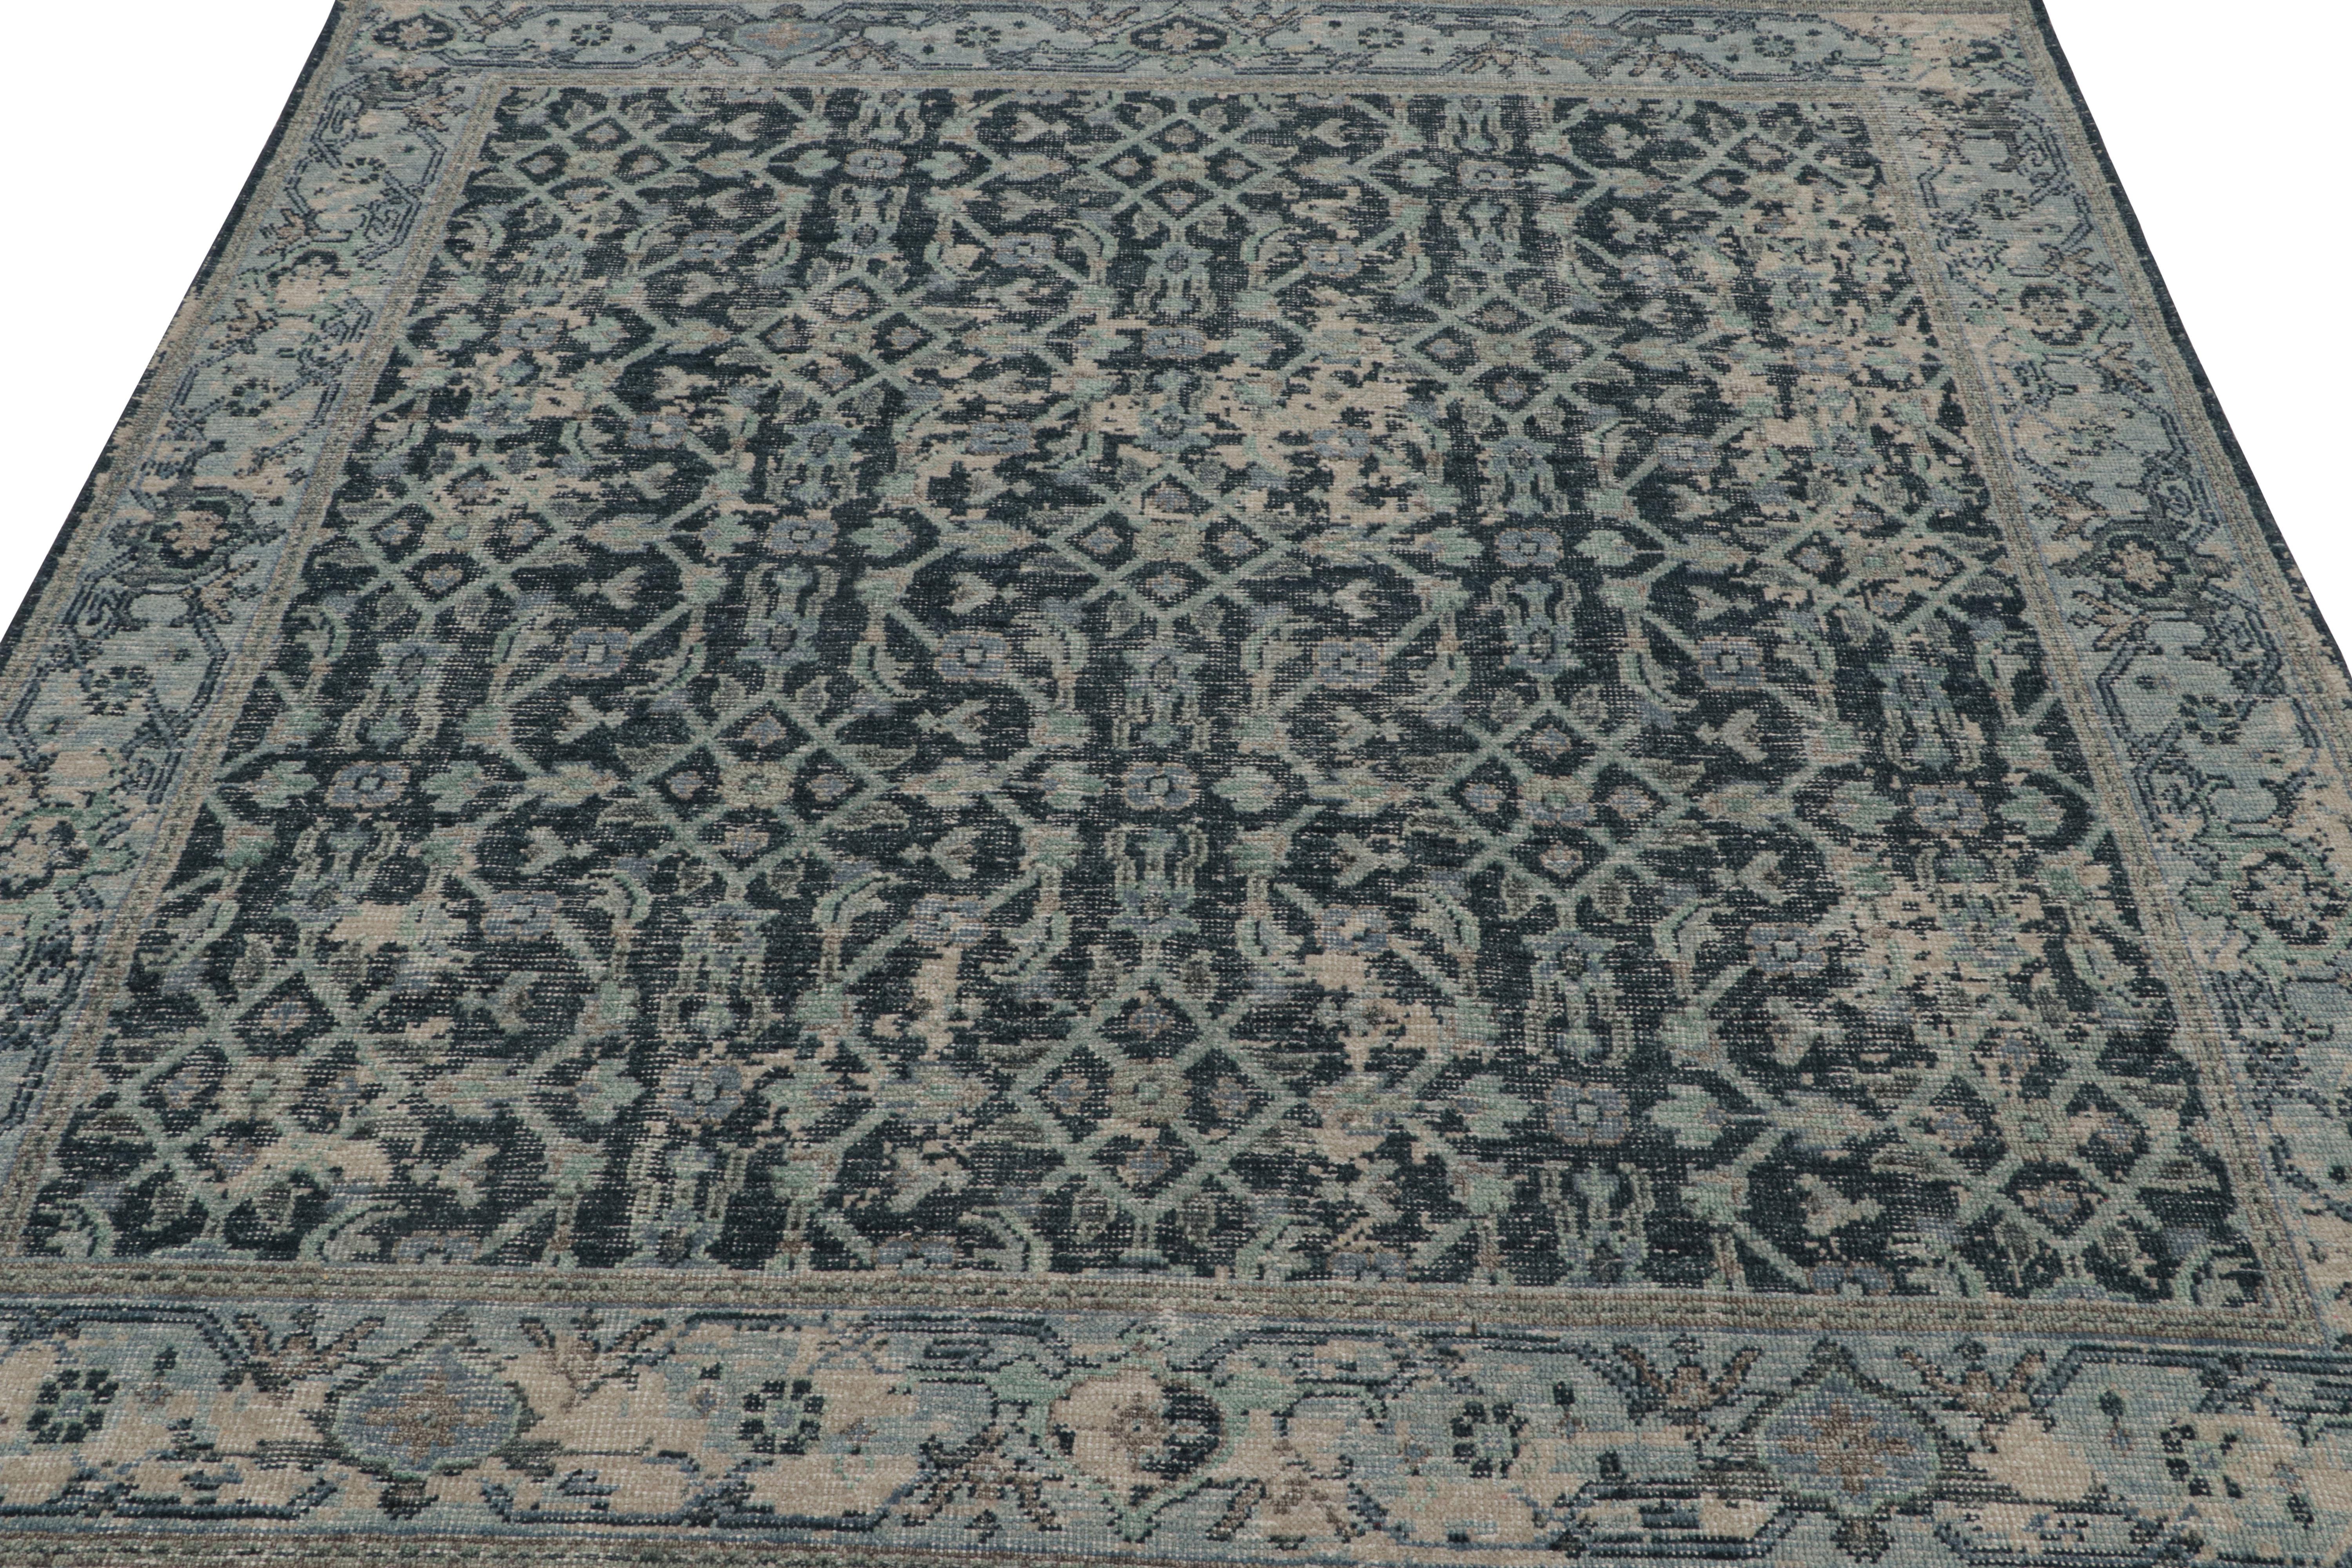 Indian Rug & Kilim’s Distressed Style Rug in Blue with Floral Patterns For Sale